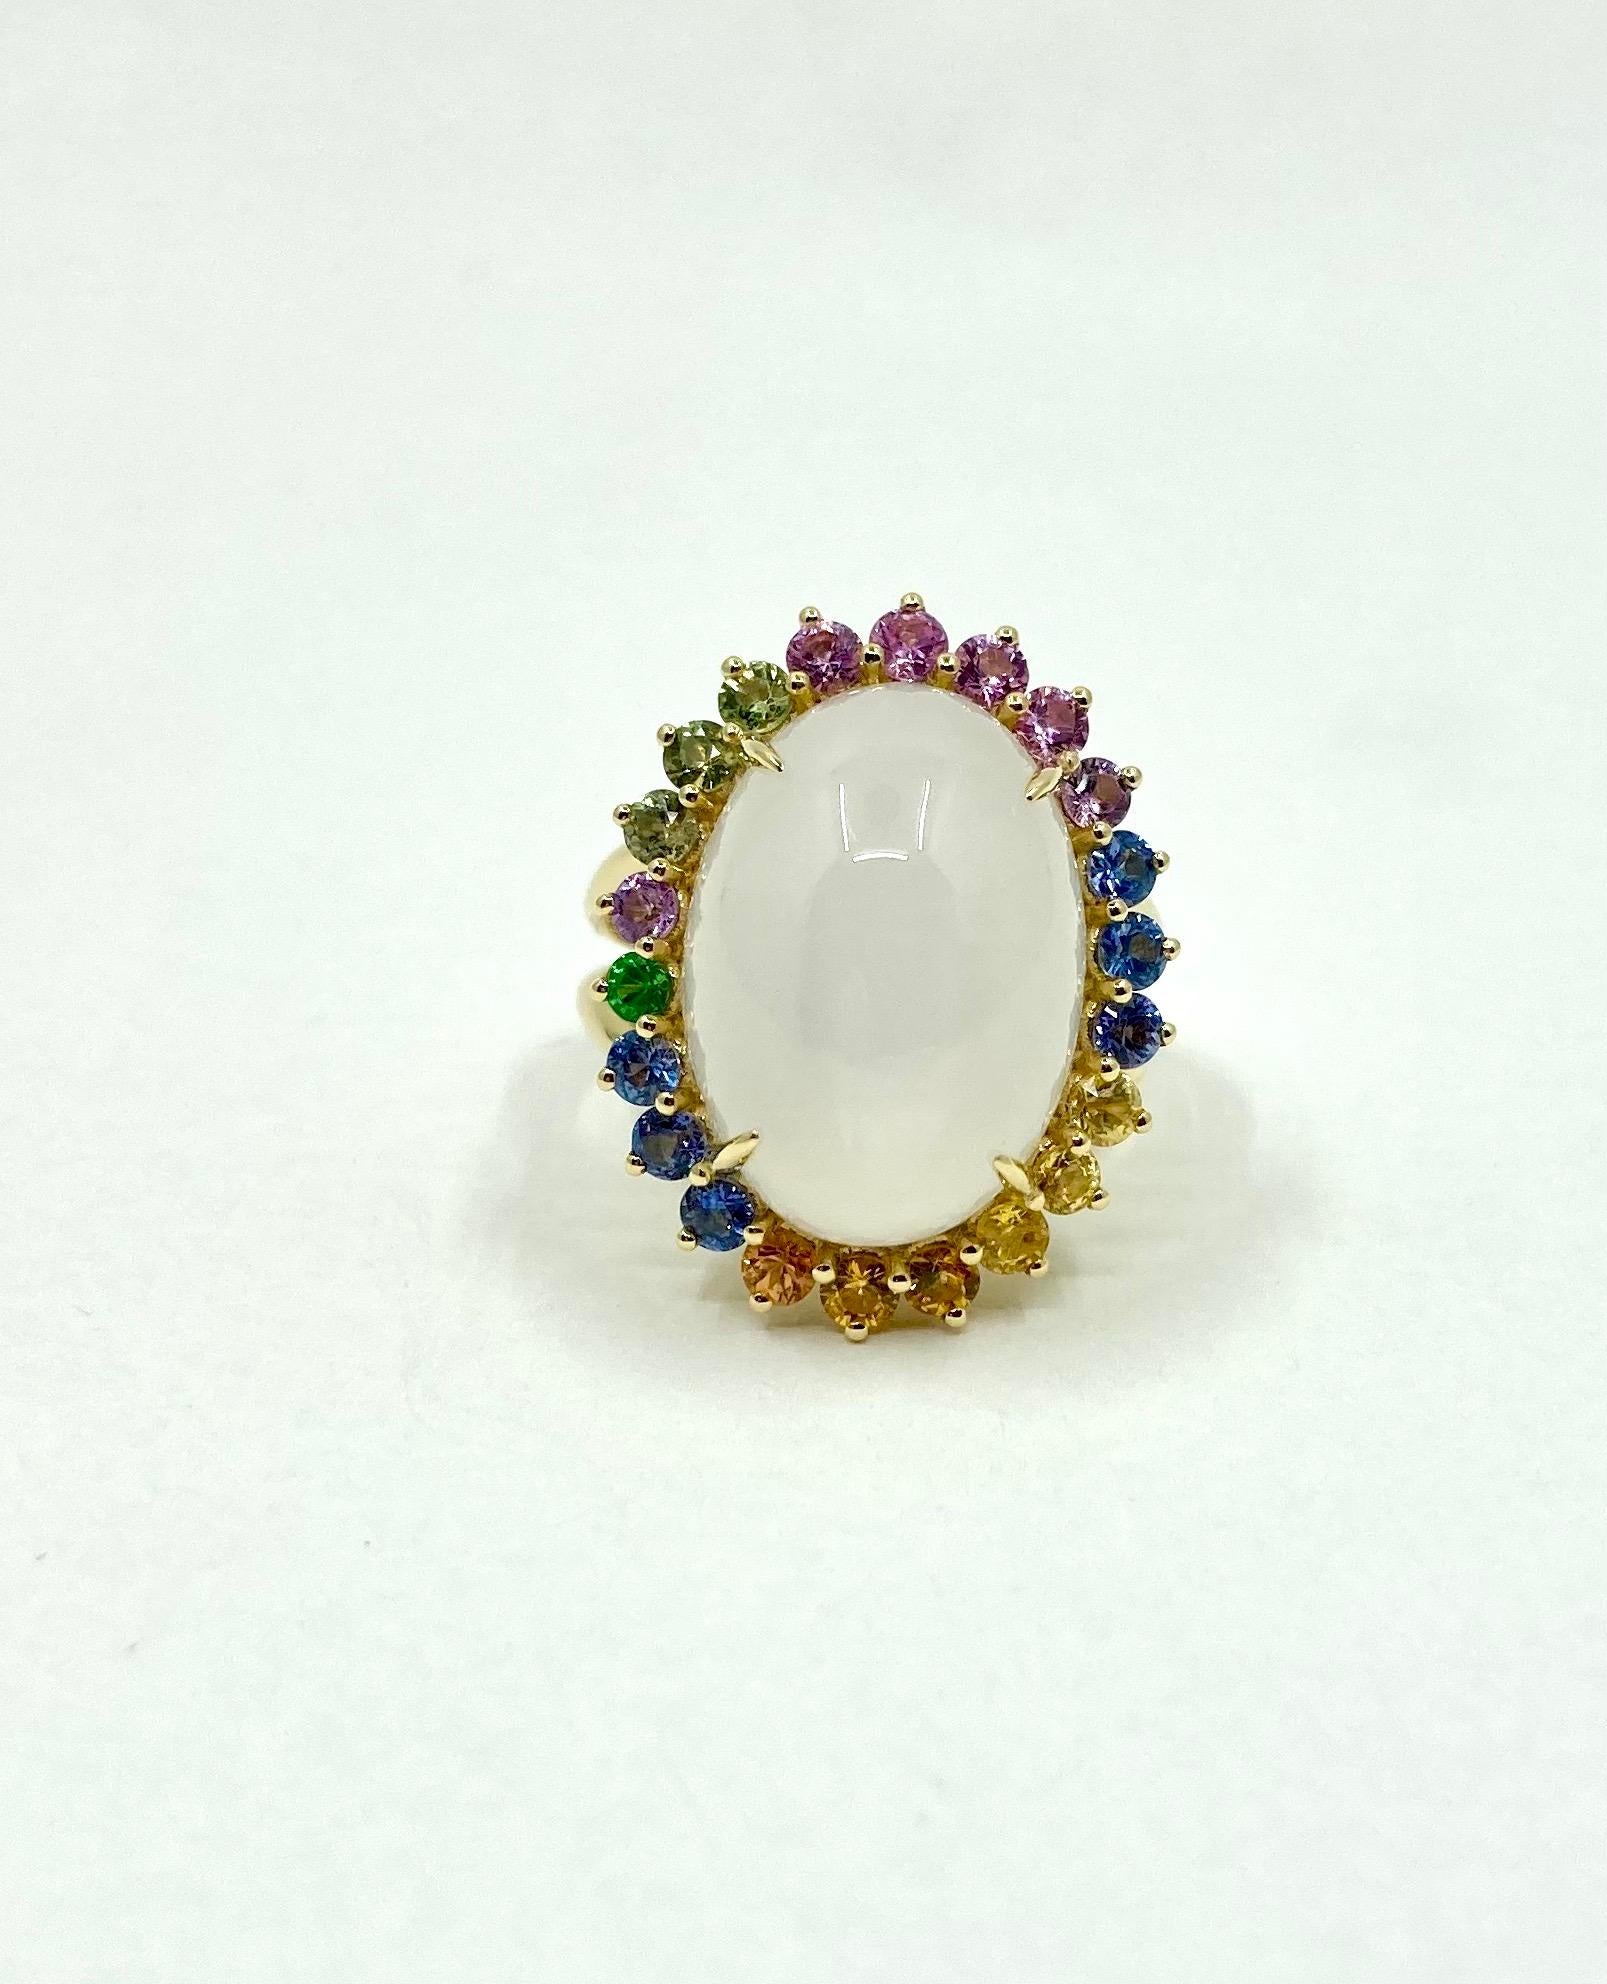 Timeless elengat Yellow Gold Ring, with a central White Moonstone ct. 14.55 and Multicolor Sapphires (Blue, Green, Orange, Purple) ct. 1.73, Made in Italy by Roberto Casarin. 

Size: 15 (7 1/4 USA)

A simple yet refined design, this ring is perfect